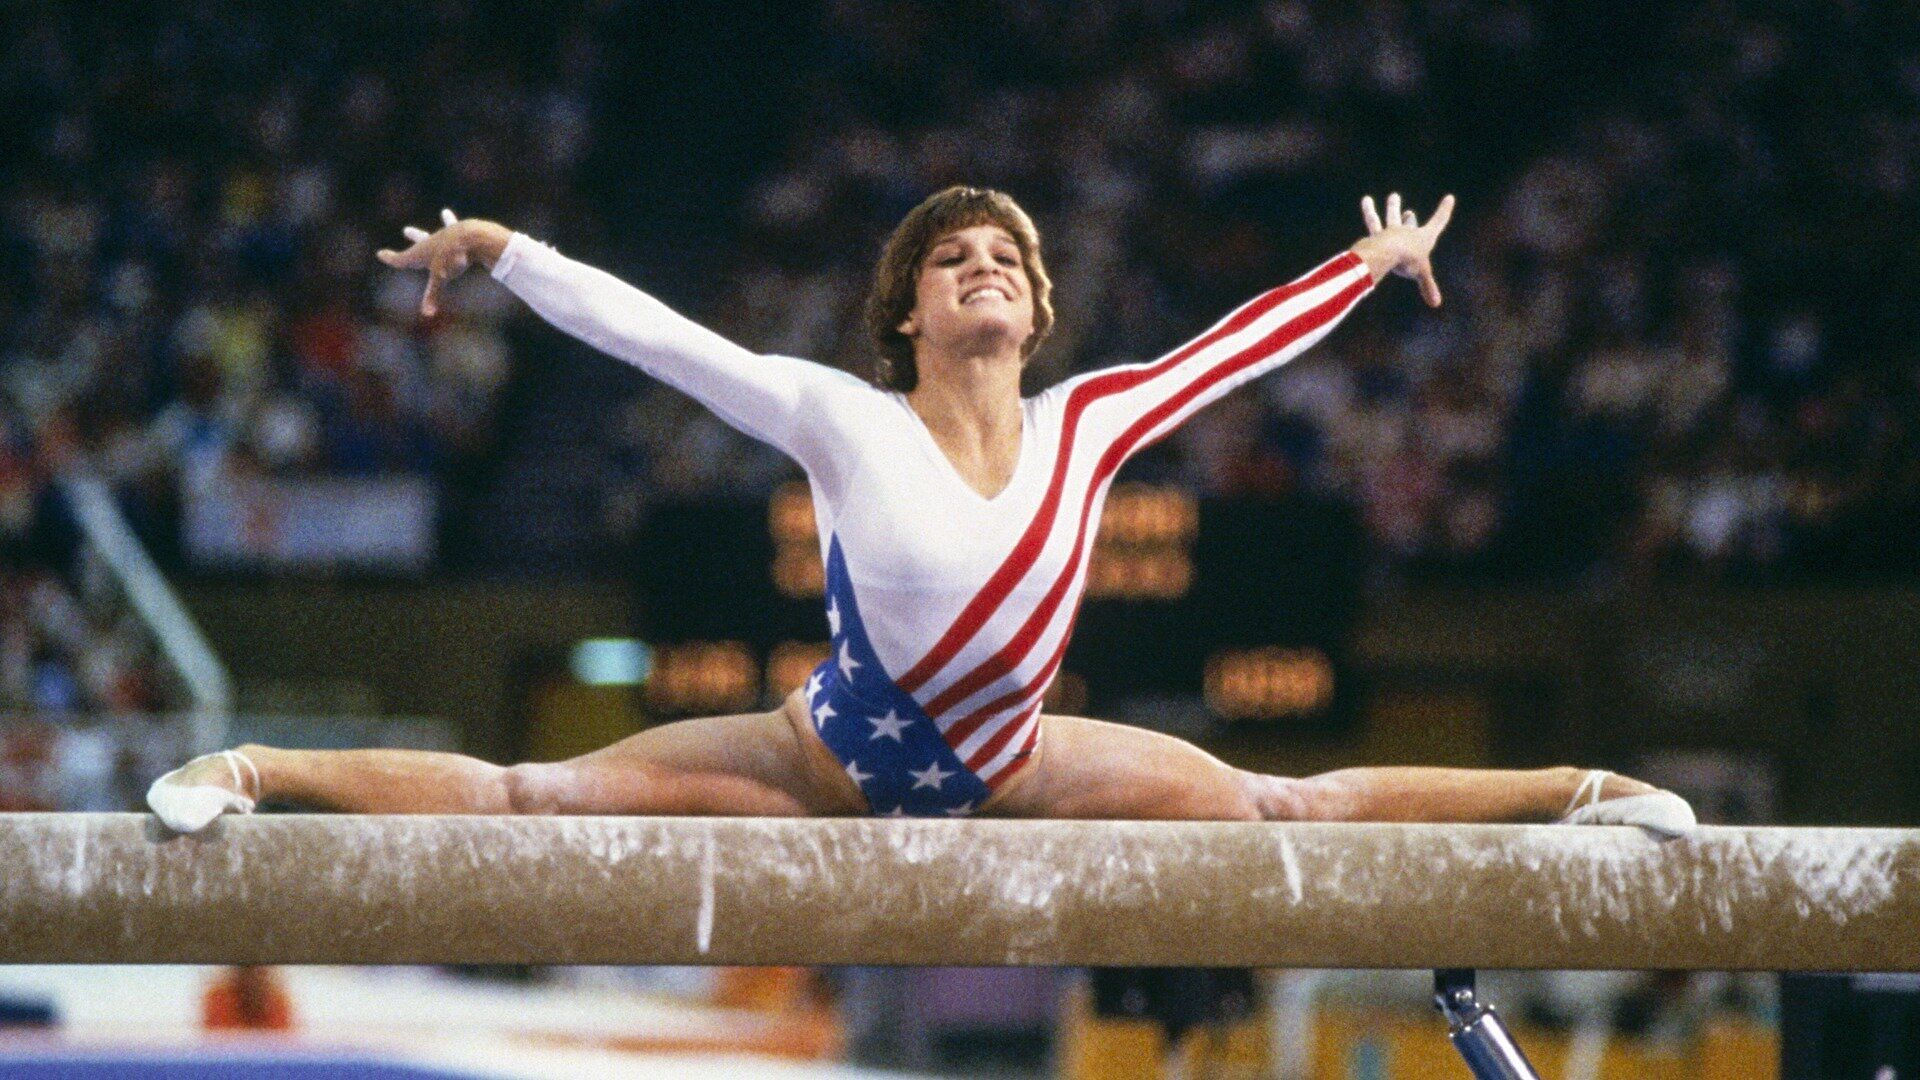 Marry Lou Retton at 1984 Summer Olympics (Image via Recognize)